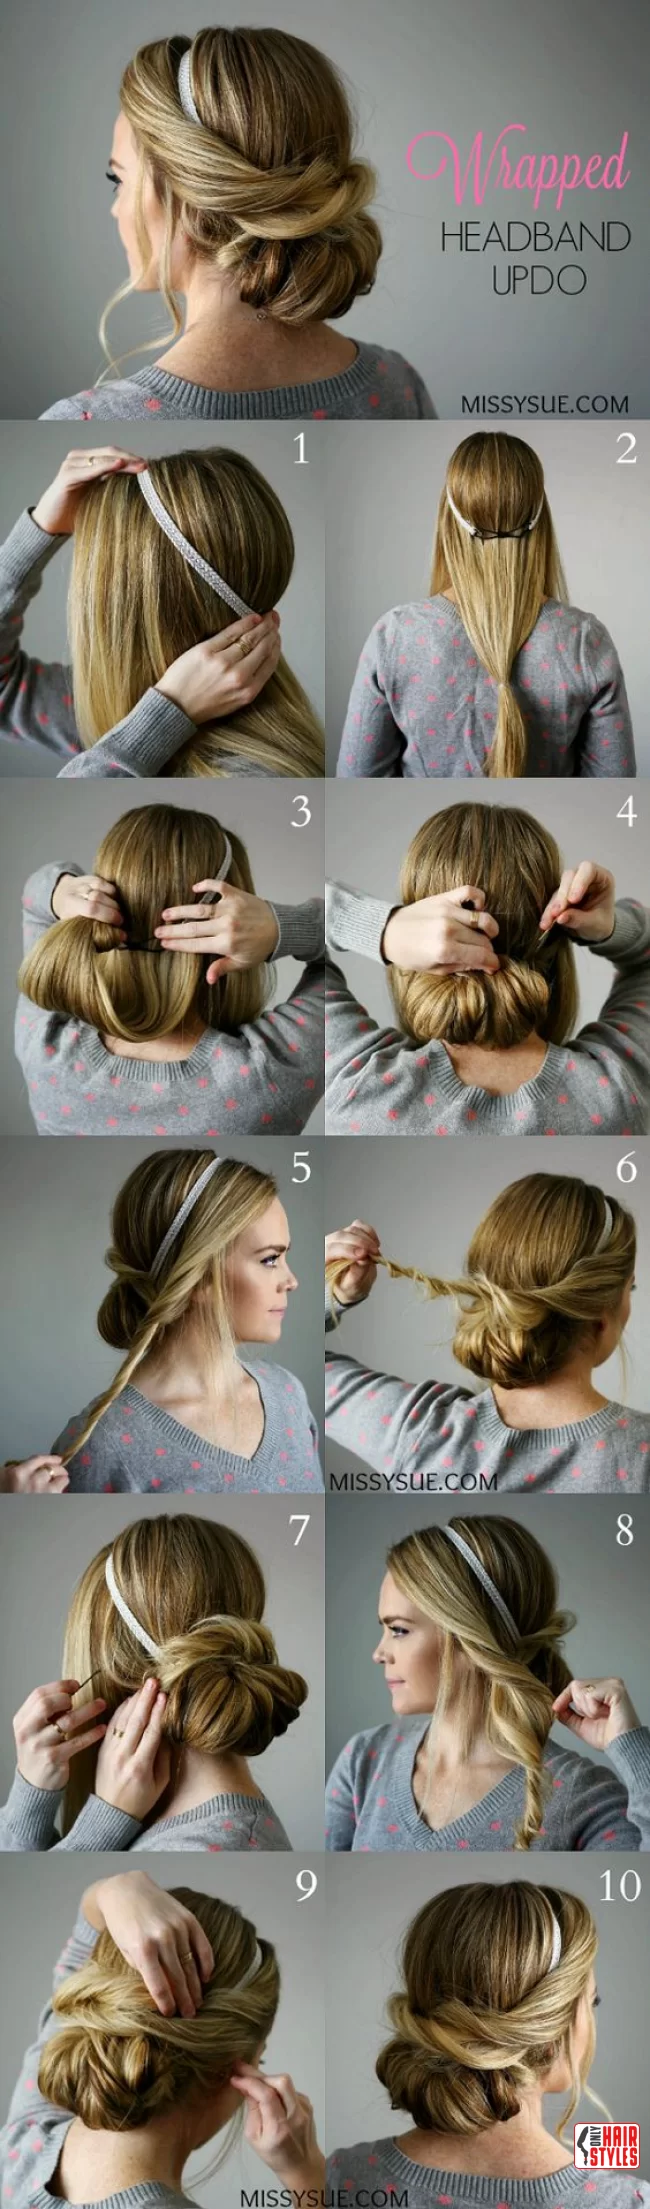 Wrapped Headband Updo | 10 Easy Step By Step Hair Tutorials For Chic Hairstyles